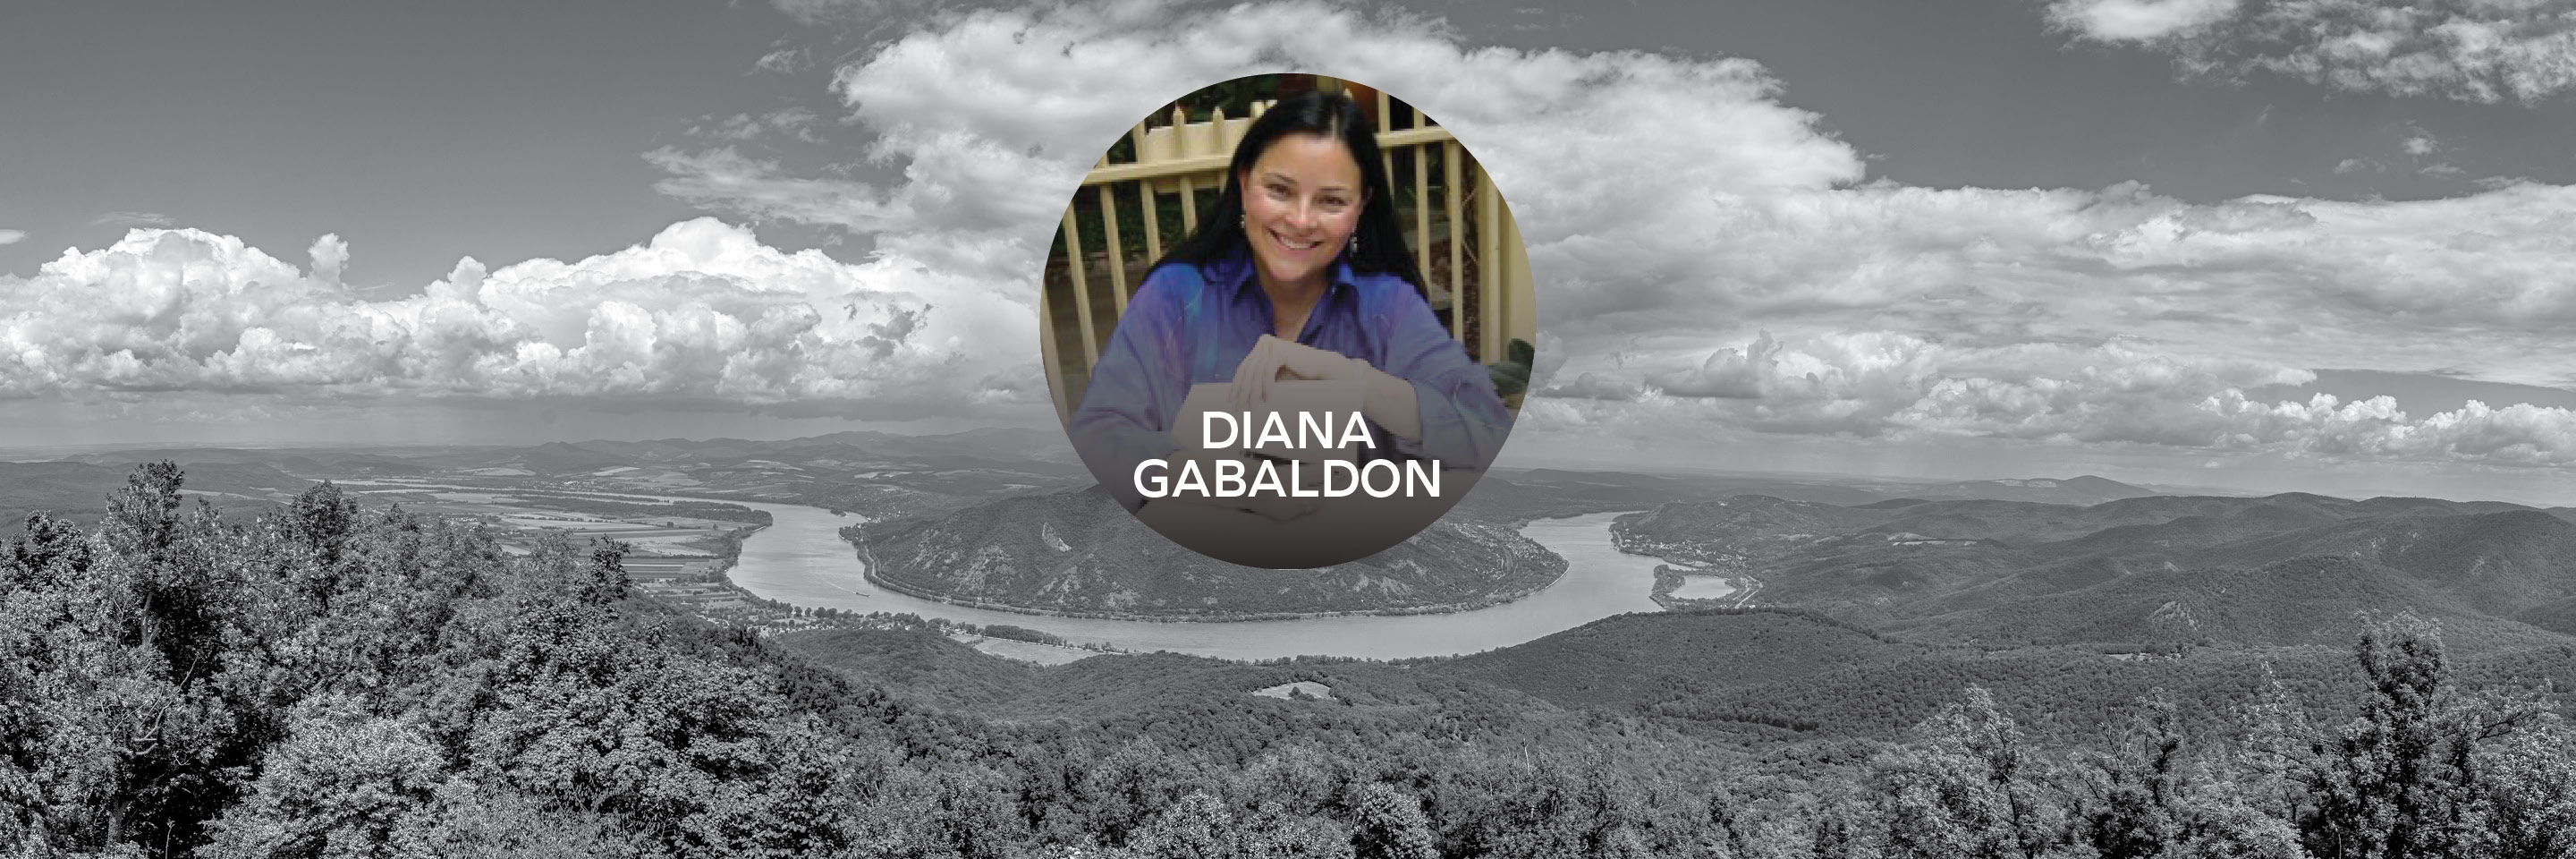 Go Tell the Bees… The Danube from Germany to the Black Sea Come True with Diana Gabaldon